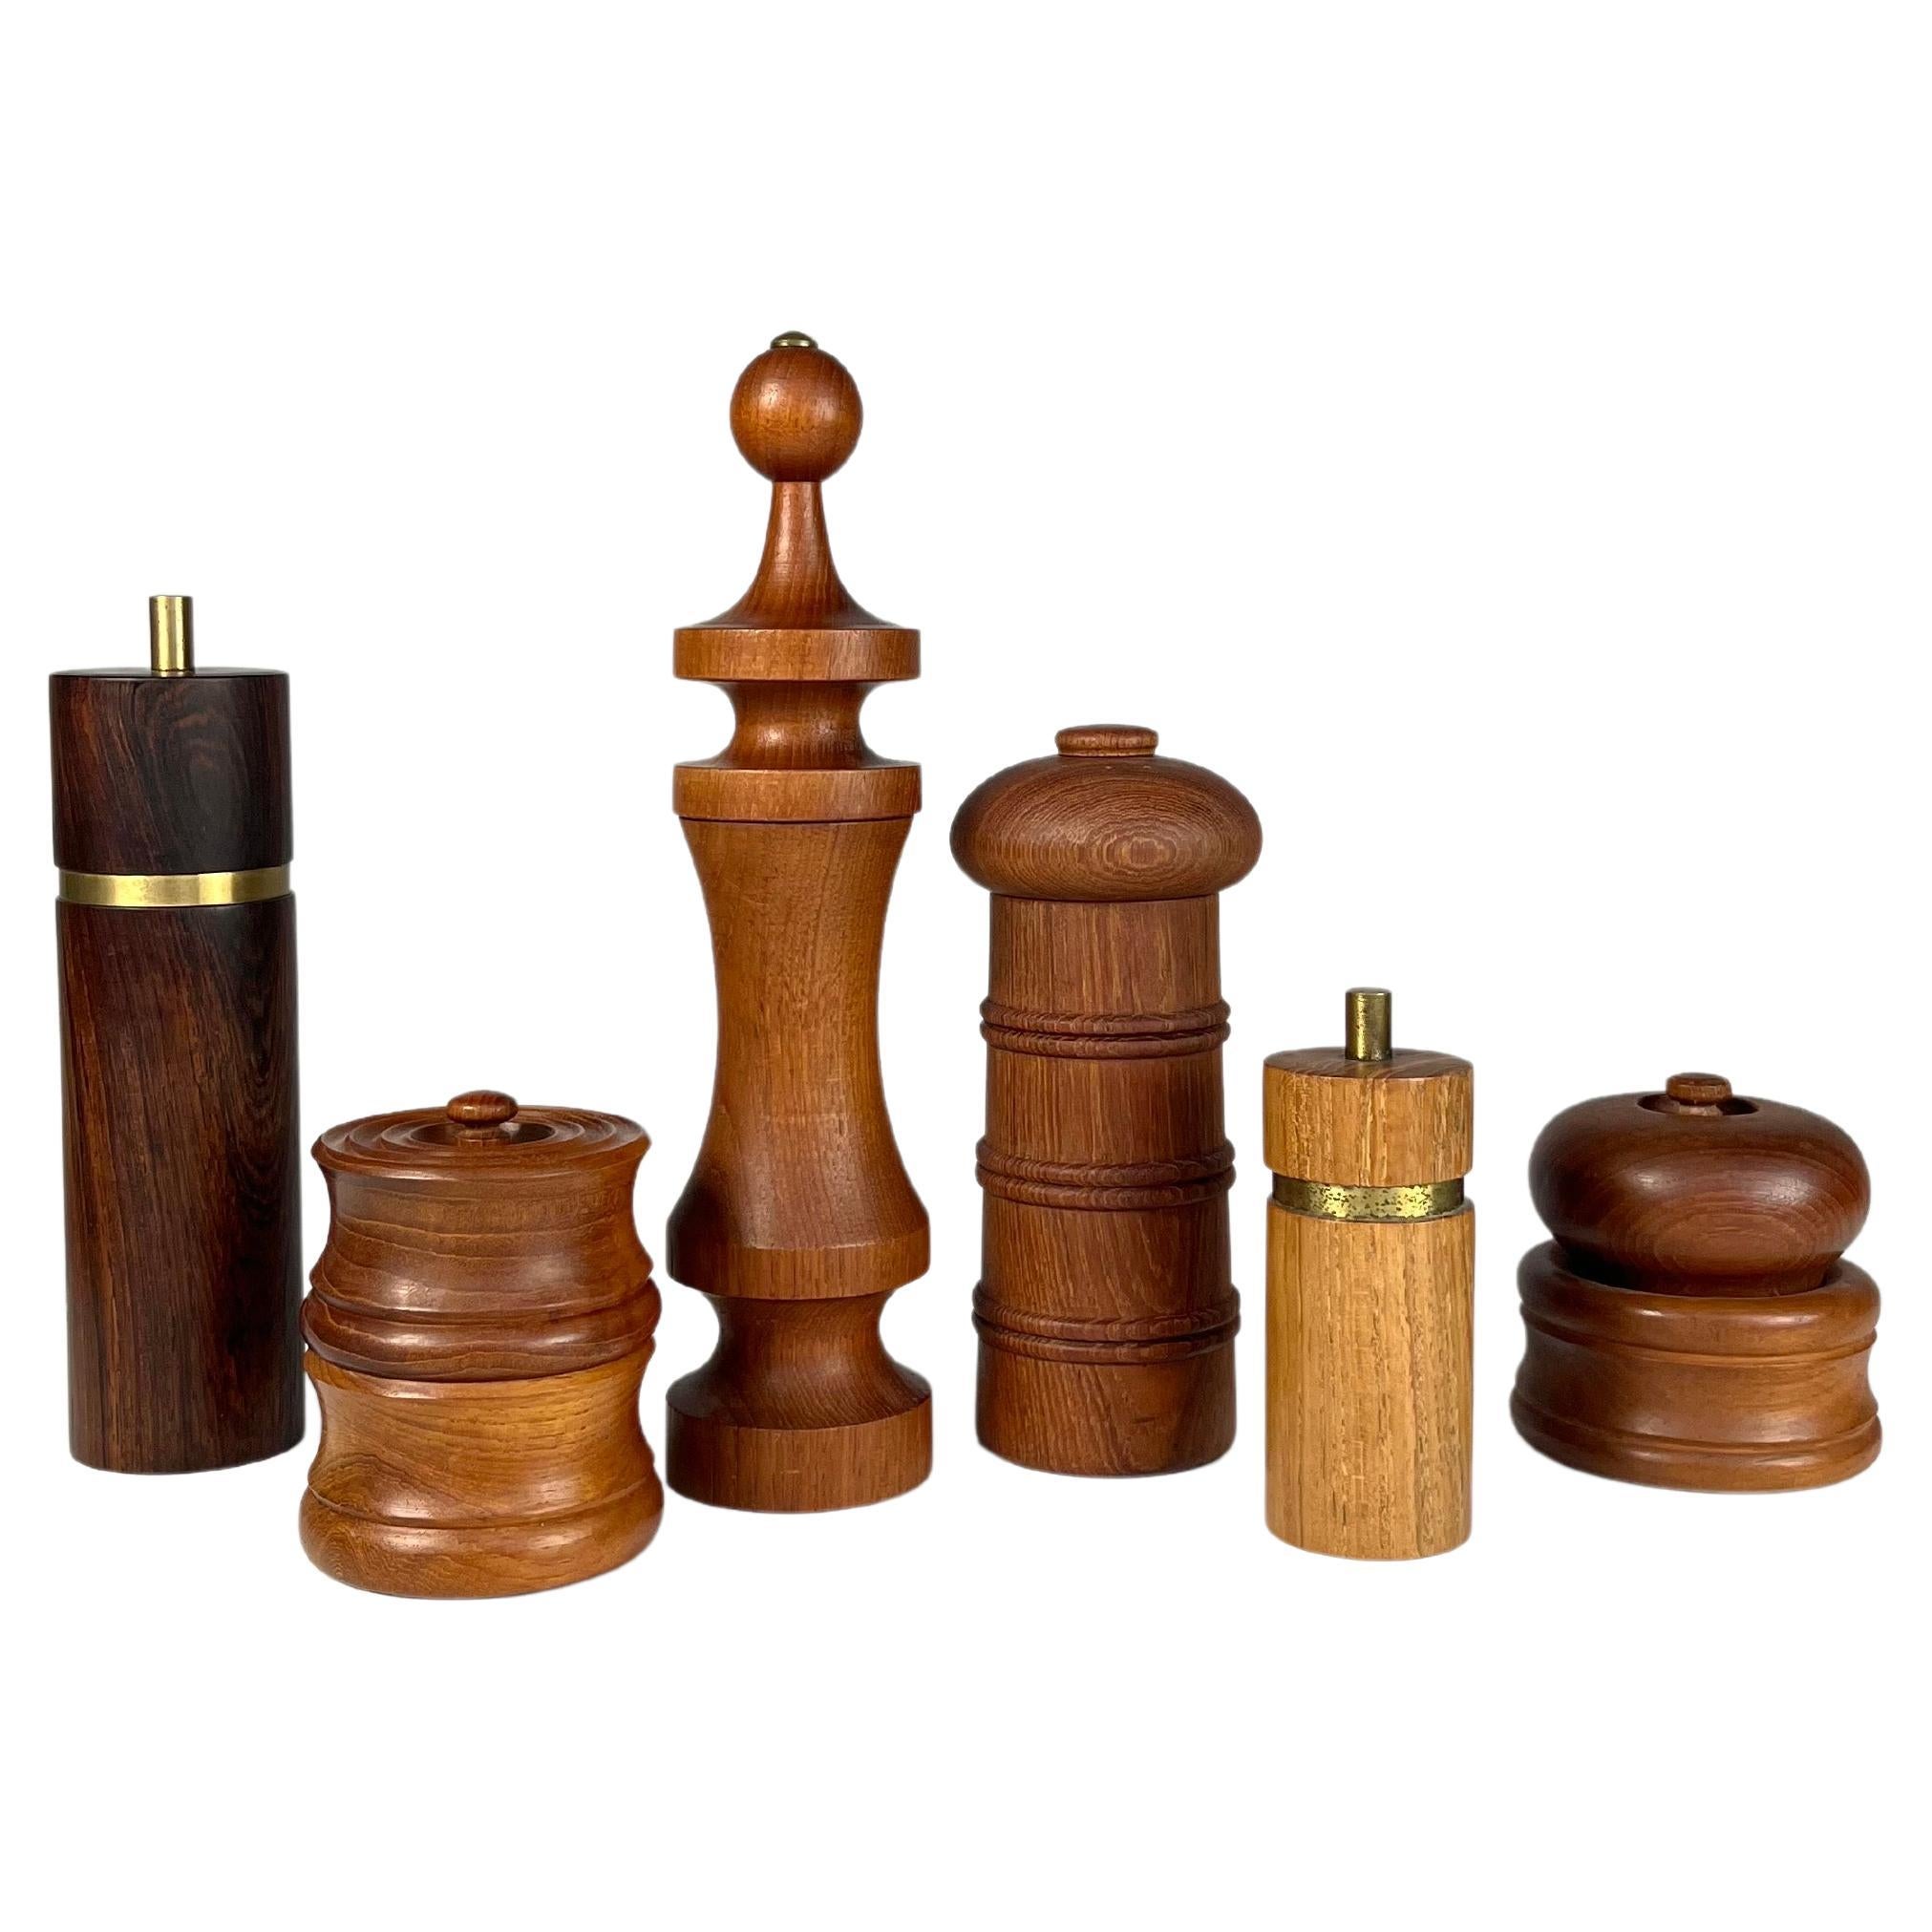 A beautiful collection of Danish pepper mills. From left to right first photo:

- Sven Petersen for SAAP, Denmark, 1960s, made of rosewood & brass, h: 22 cm, d: 6 cm

- by Nissen Denmark, 1960s, made of teak, H: 10.5 cm, D: 9.5 cm.

- Harry